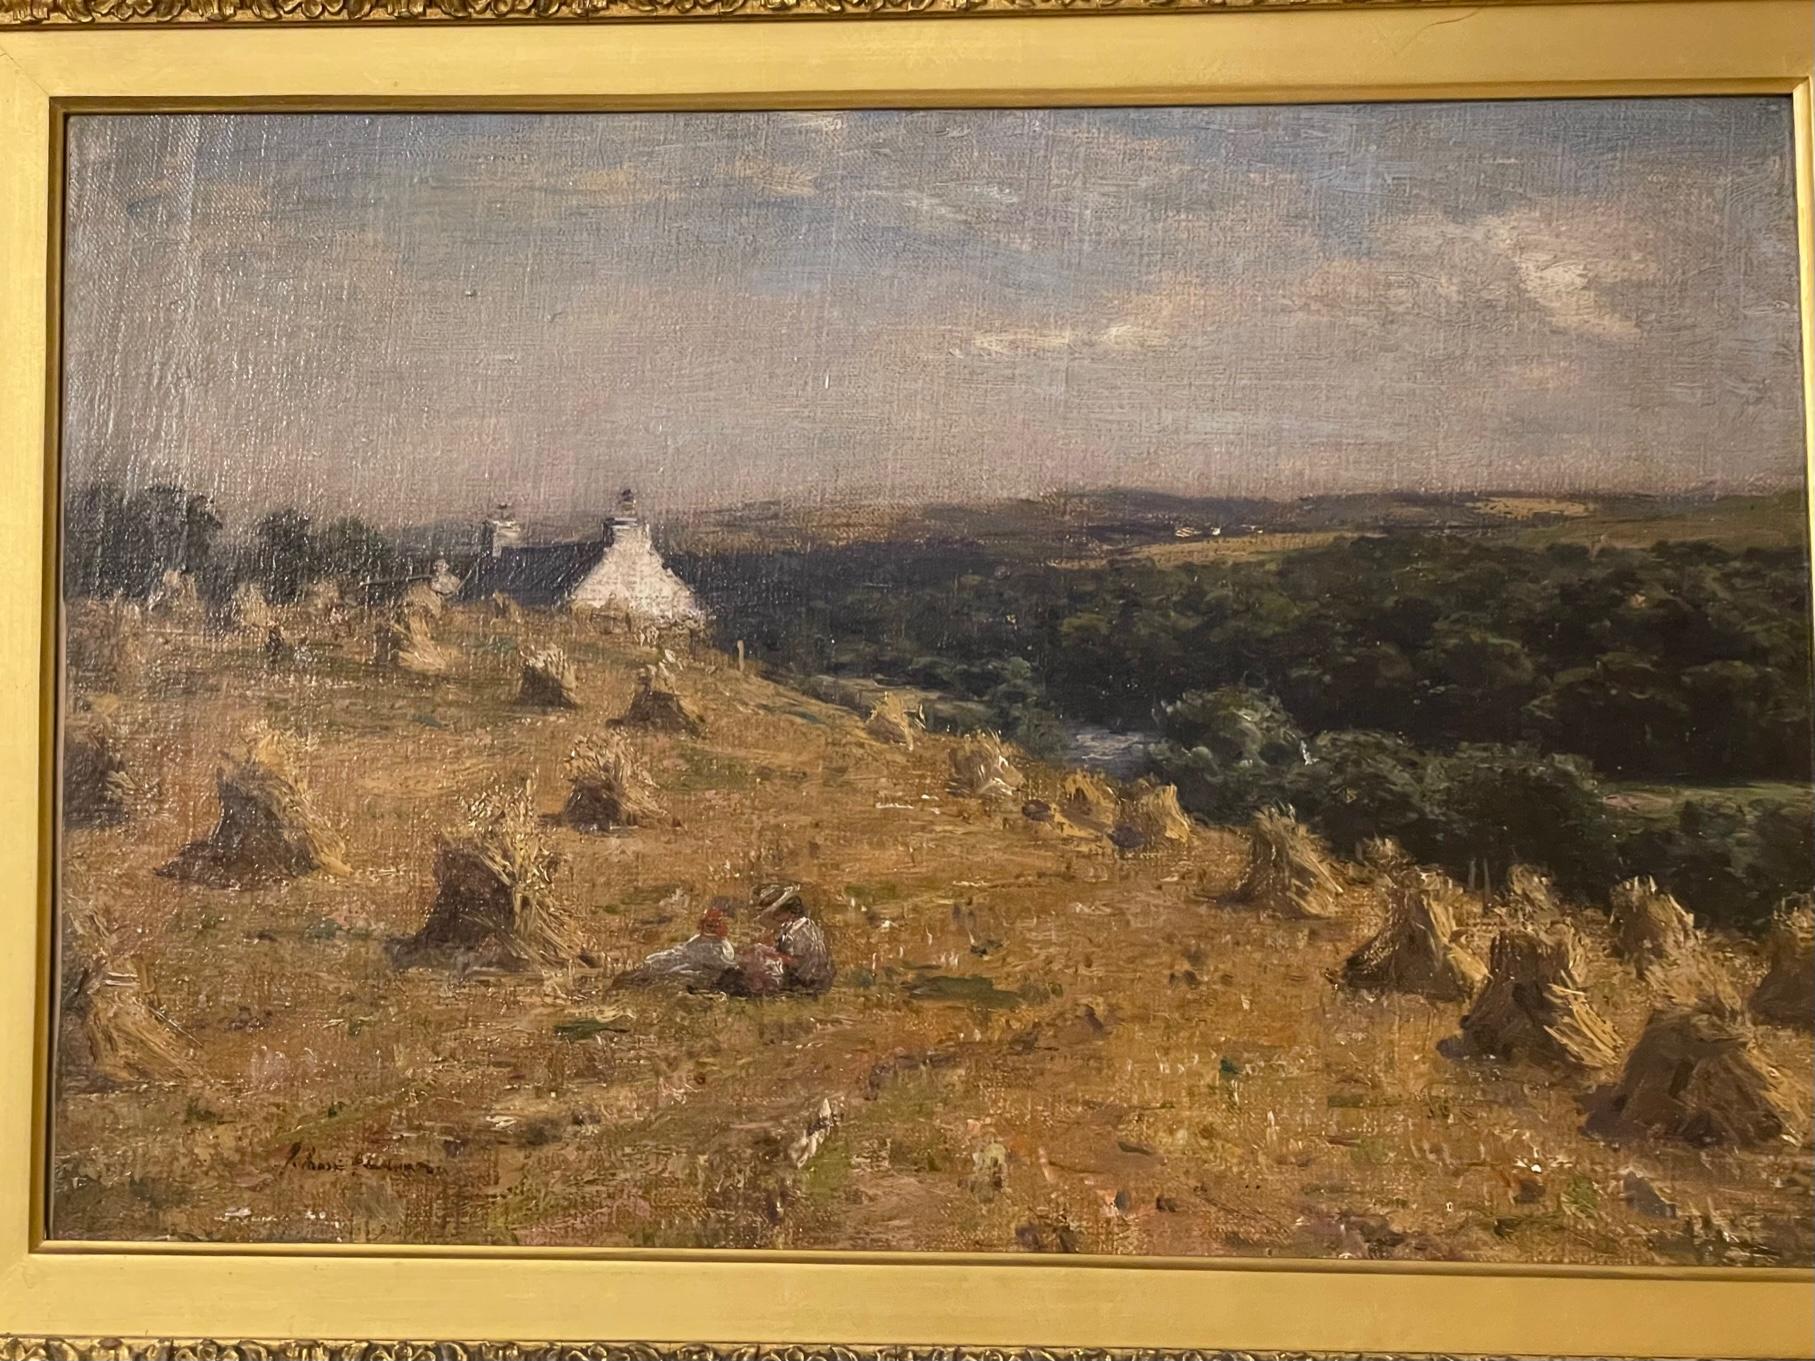   Harvest Time with Croft and Haystacks - Painting by Joseph Morris Henderson